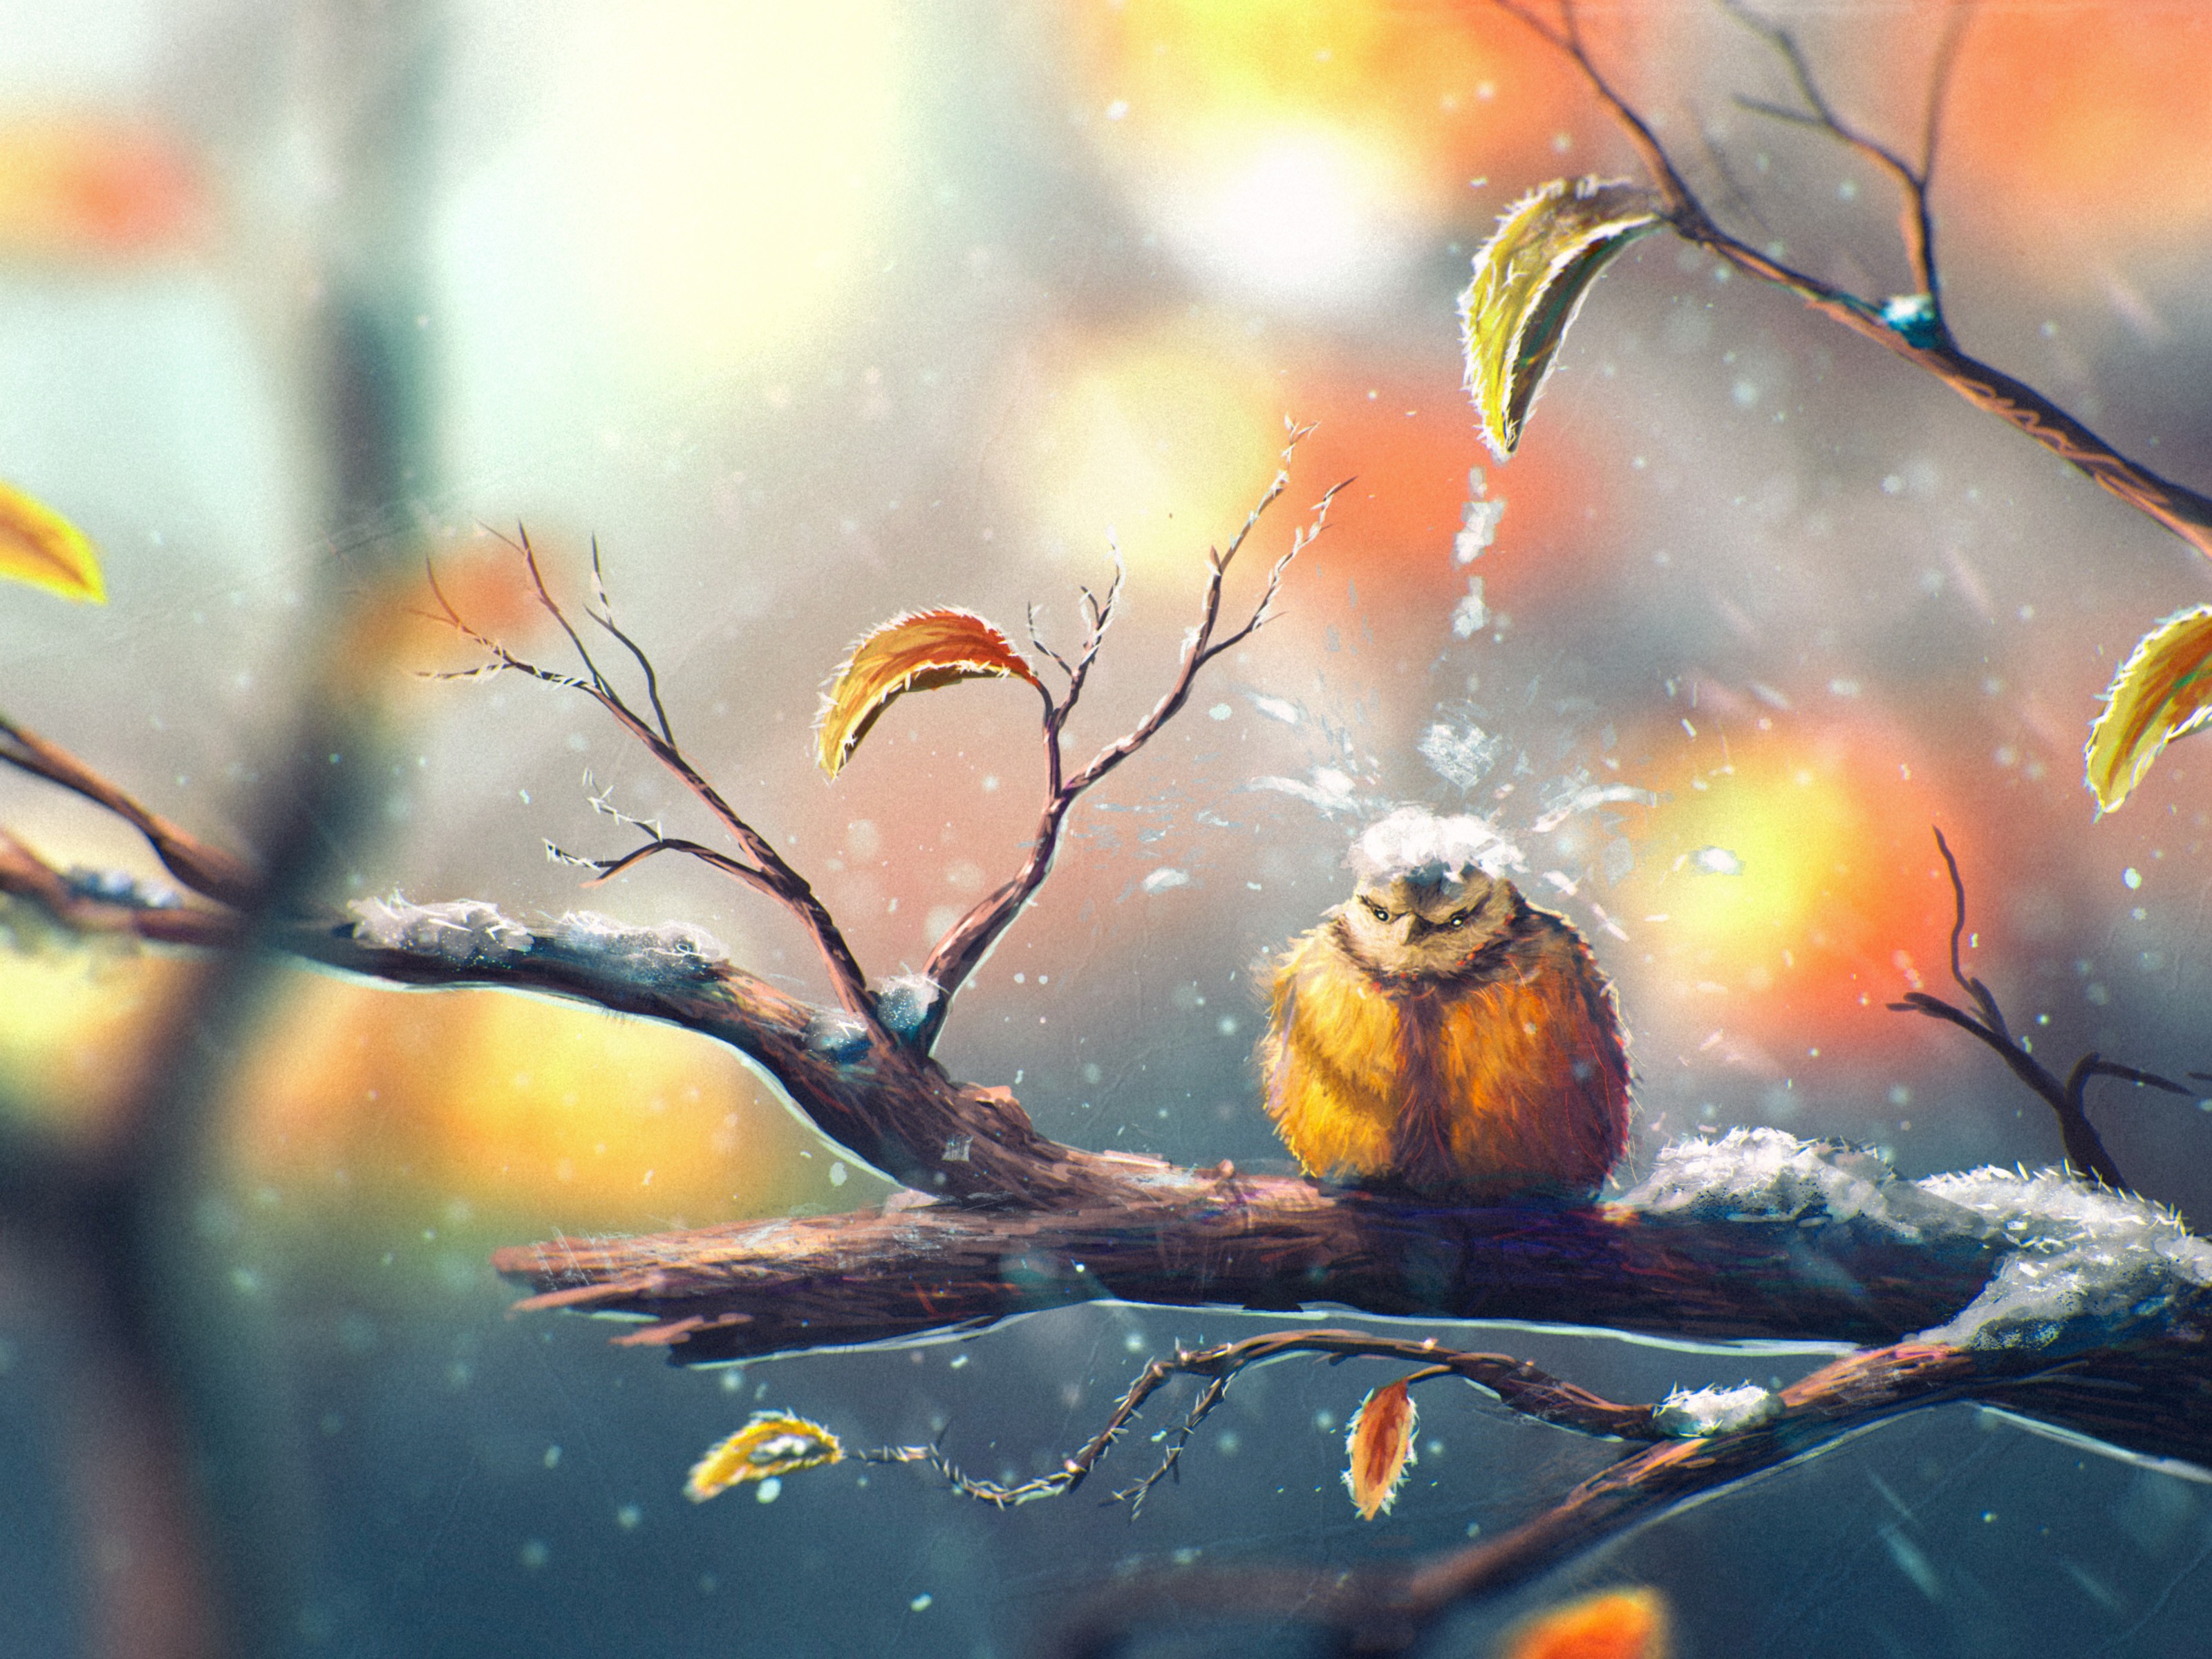 Winter Animal Nature Backgrounds